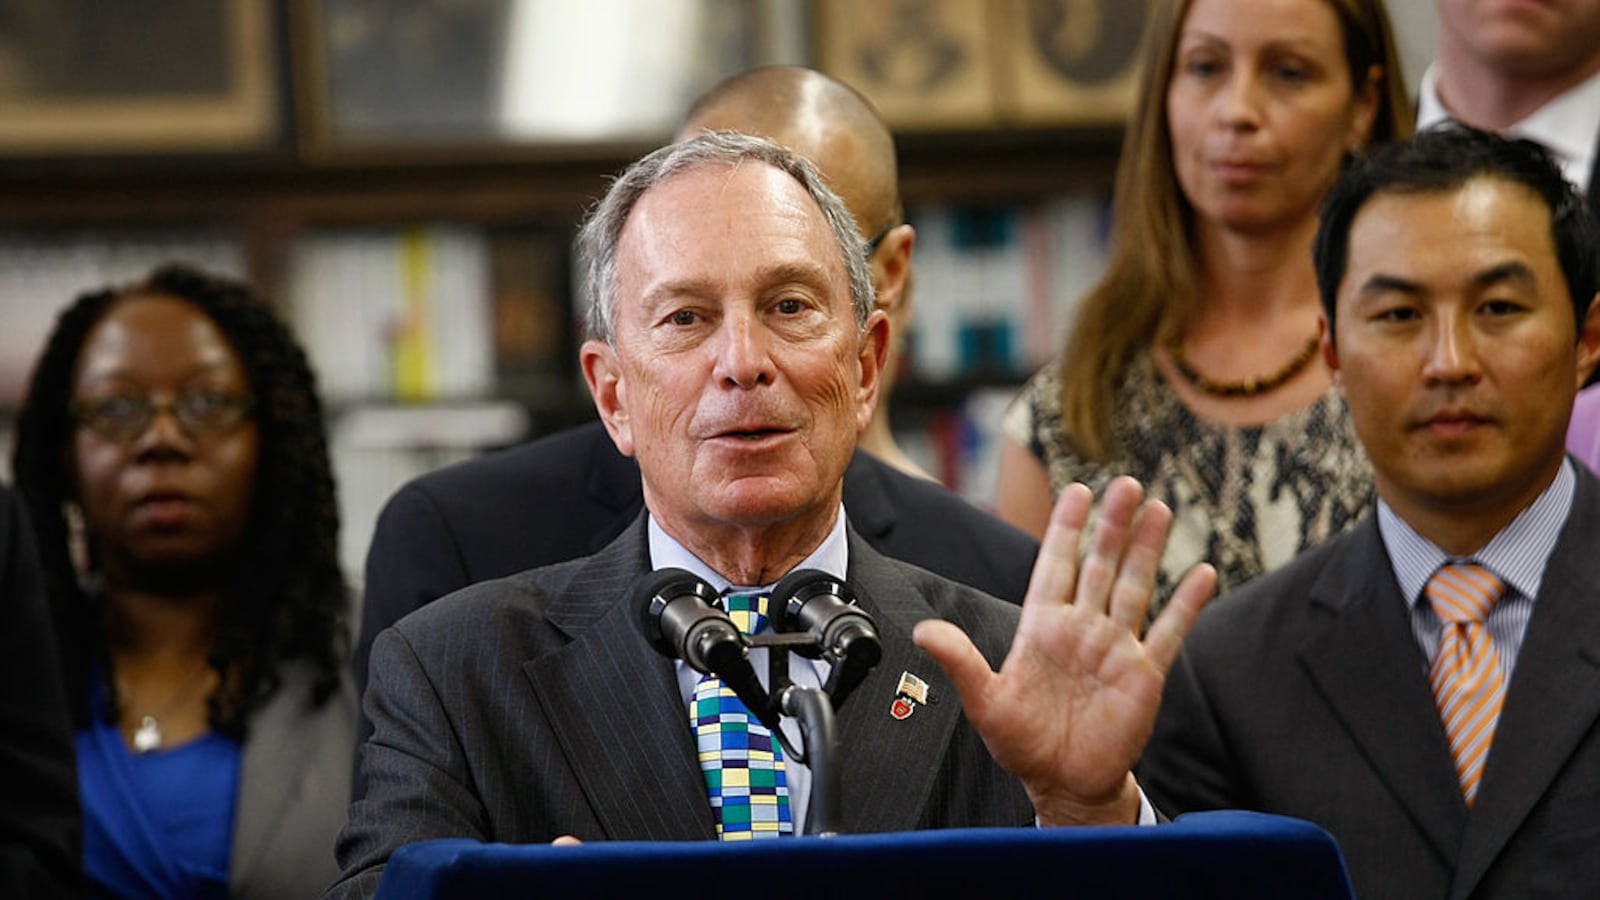 New York City Mayor Michael Bloomberg announces the city would open 54 new schools next fall at a press conference in April 2012. Bloomberg addressed the media at the Washington Irving High School, the future site of the Academy of Software Engineering, a new 9-12 school.